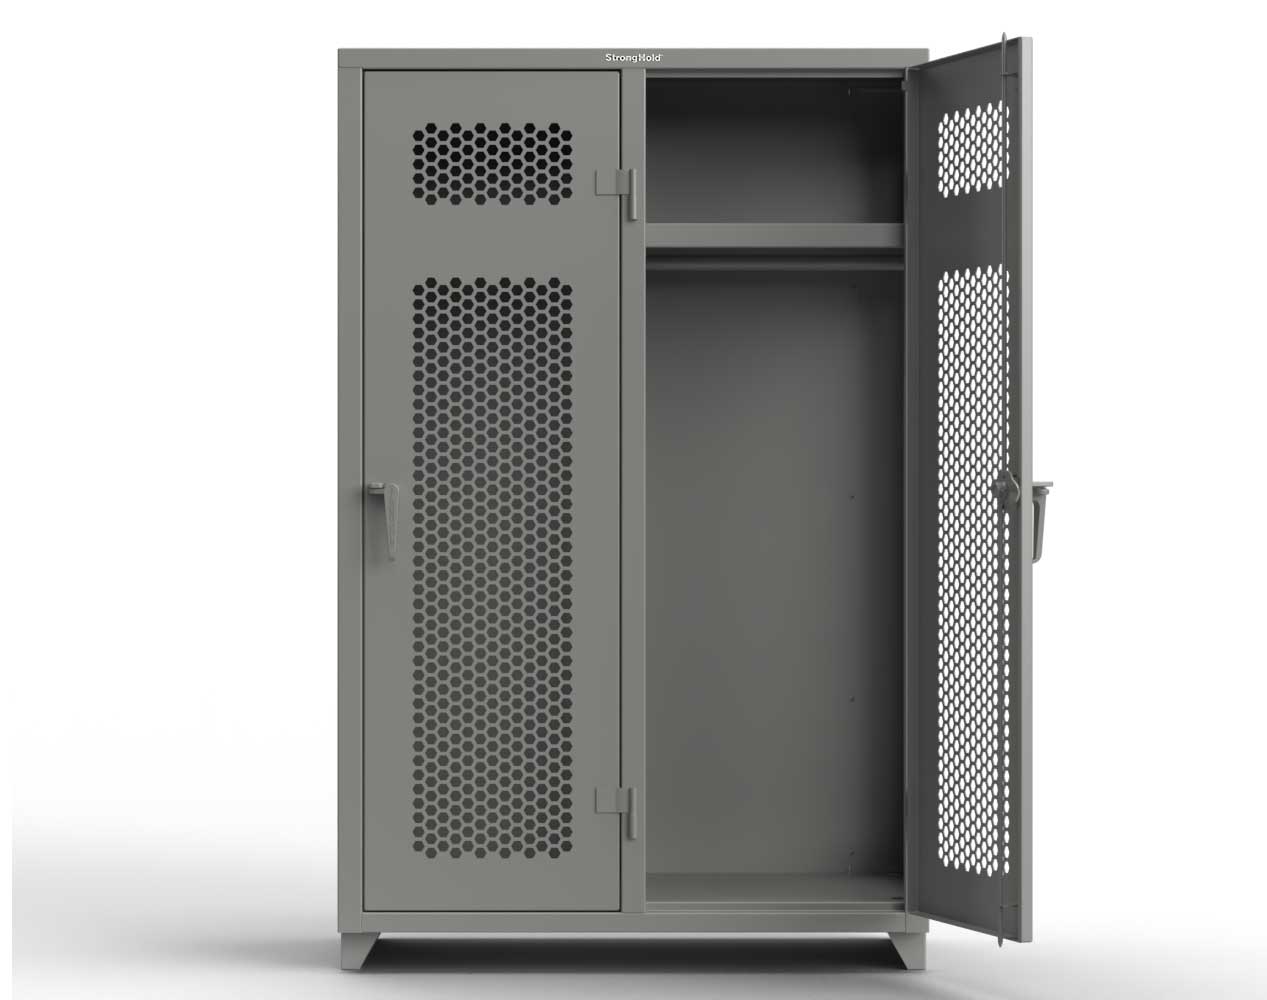 Extra Heavy Duty 14 GA Ventilated Single-Tier Locker with Shelf and Hanger Rod, 2 Compartments - 48 in. W x 24 in. D x 75 in. H